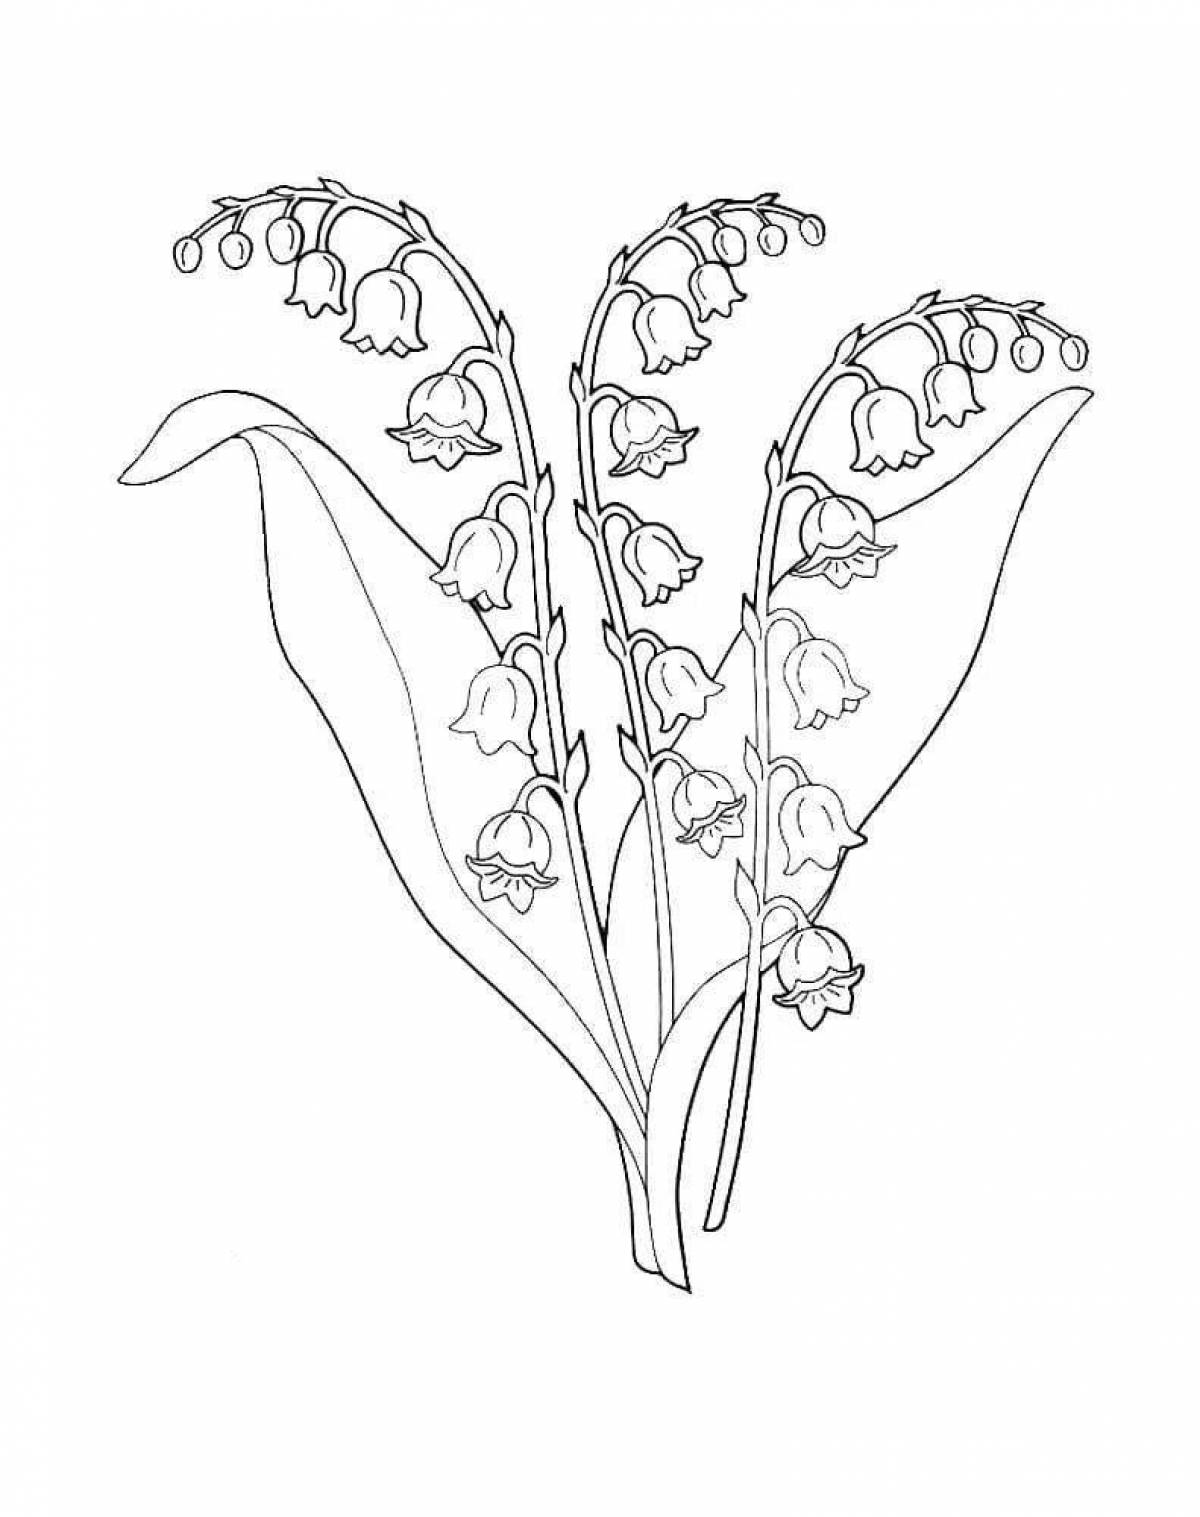 Colouring delightful May lily of the valley